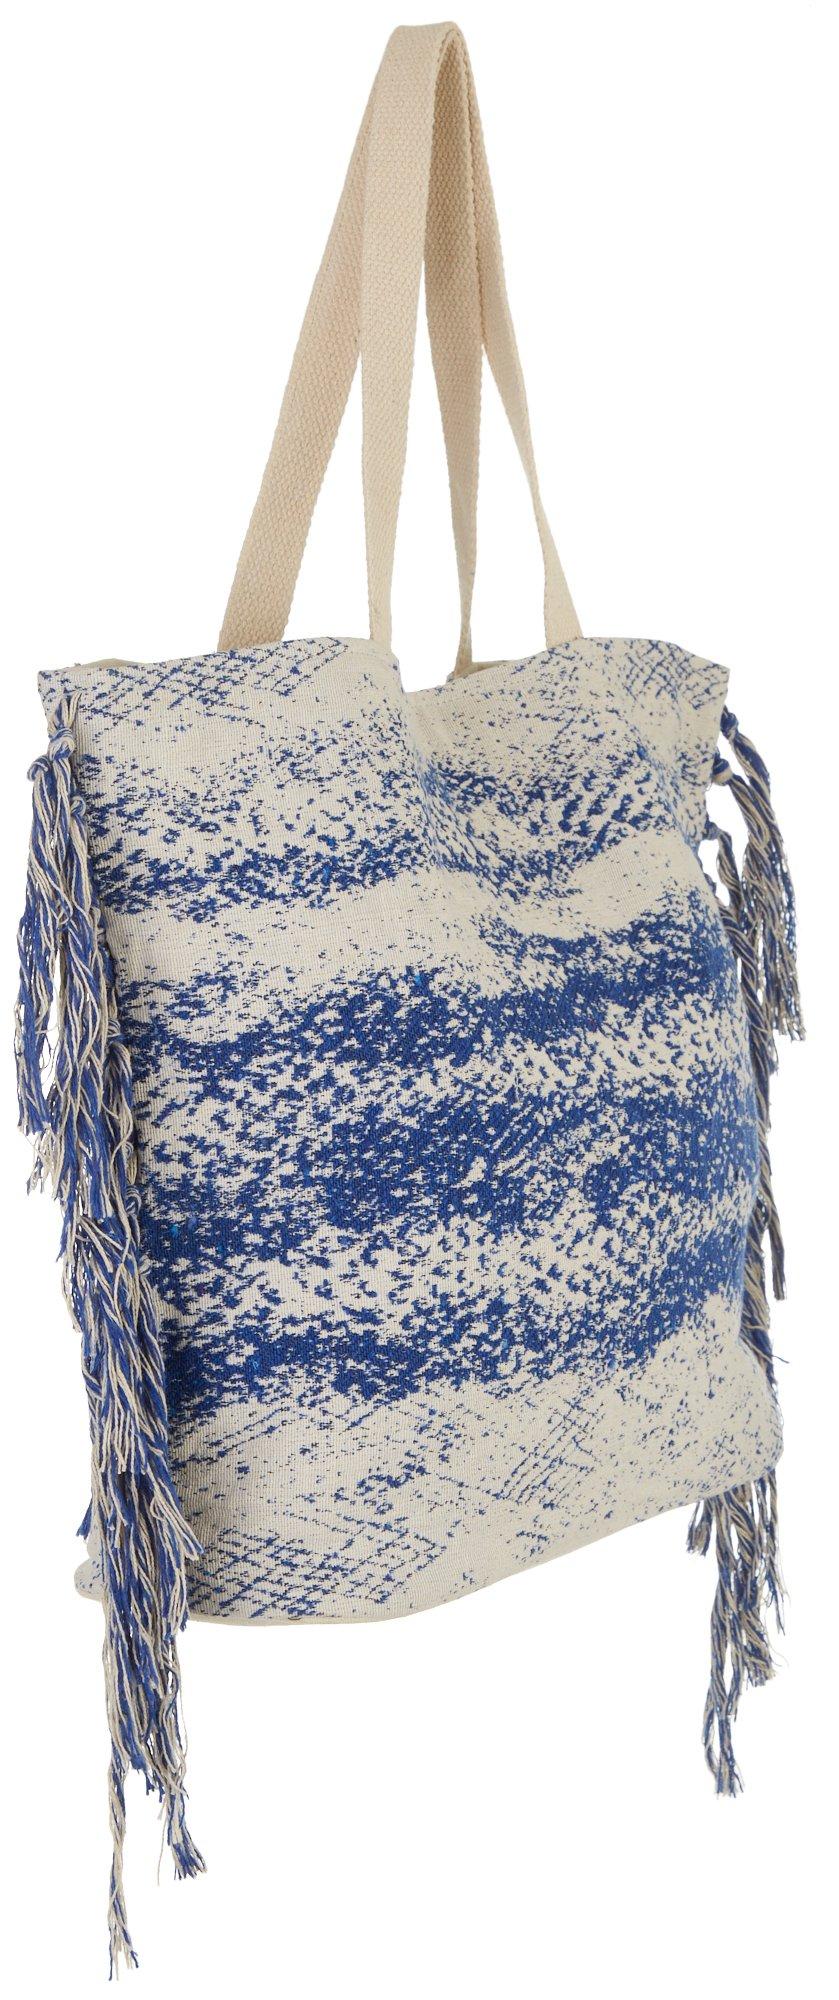 Magid Women's Beach Tote with Side Fringes - image 3 of 4